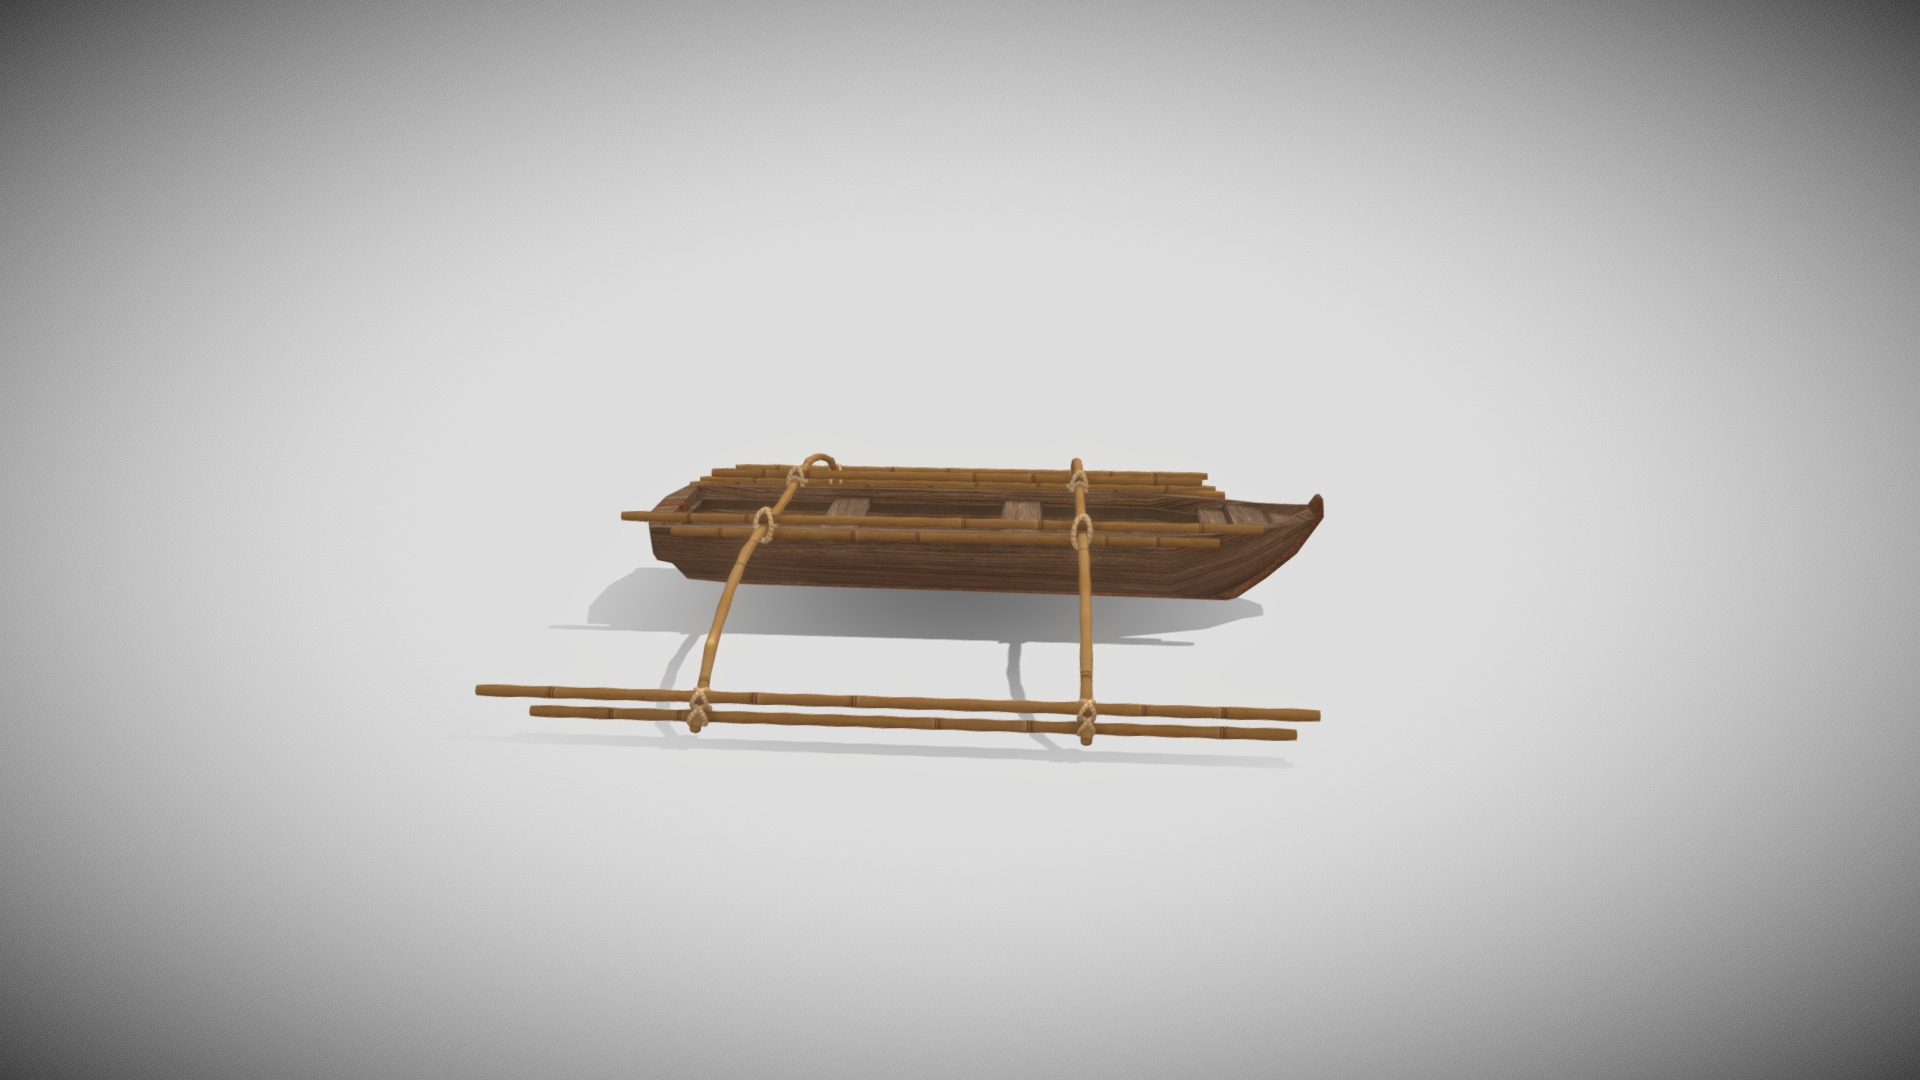 3D model 3D Boat - This is a 3D model of the 3D Boat. The 3D model is about a wooden object with a handle.